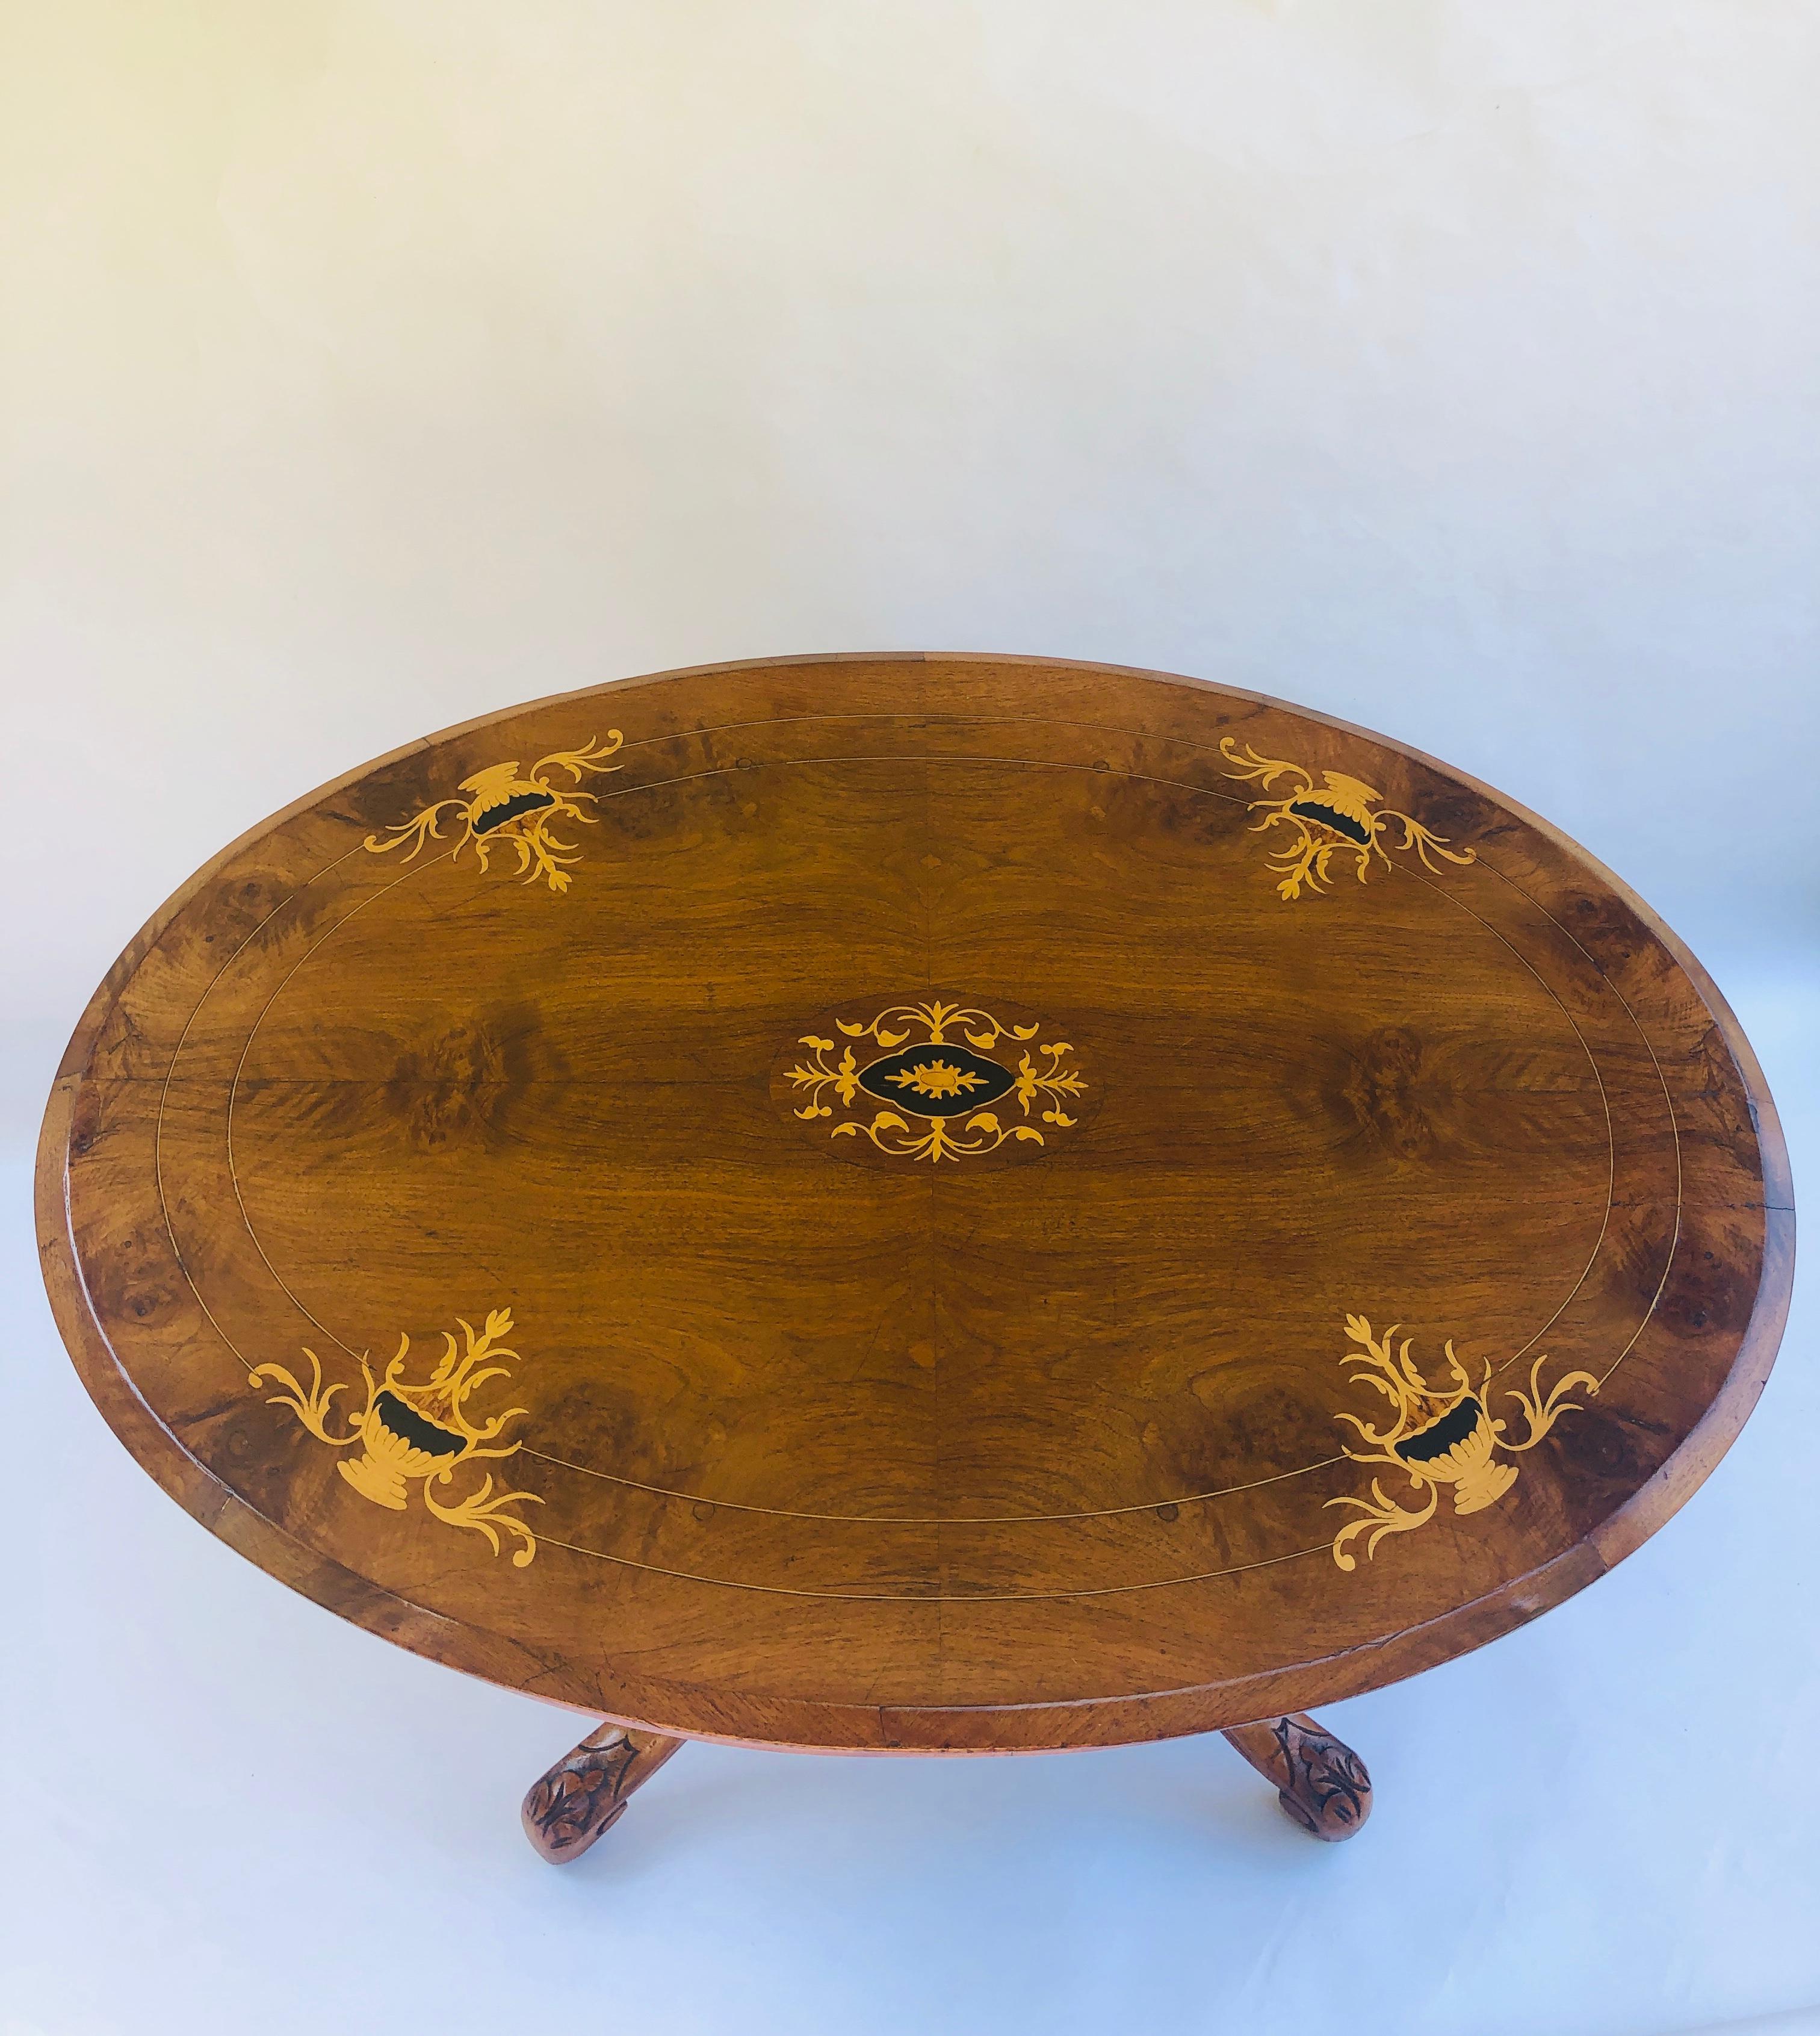 Antique Victorian walnut inlaid oval centre table having a charming walnut top with attractive boxwood inlay. The oval shaped frieze has boxwood stringing and the base has 4 splendid turned columns supported by 4 shaped carved cabriole legs standing